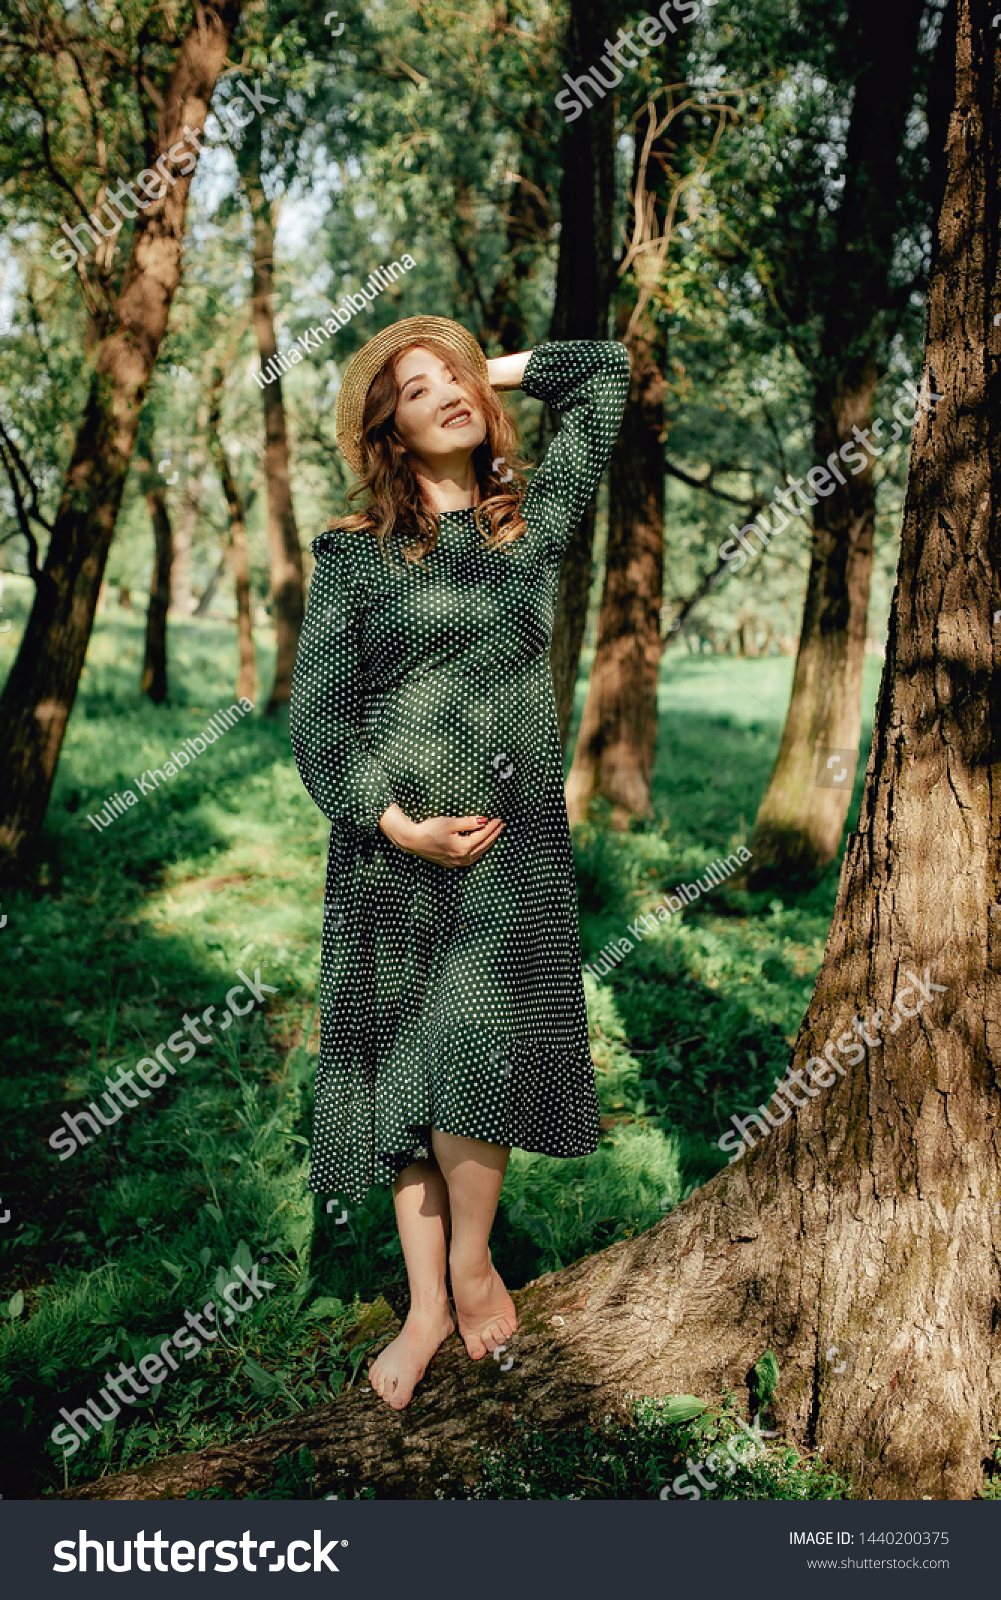 https://image.shutterstock.com/shutterstock/photos/1440200375/display_1500/stock-photo-pregnant-woman-posing-in-a-green-park-young-happy-pregnant-woman-relaxing-and-enjoying-life-in-1440200375.jpg